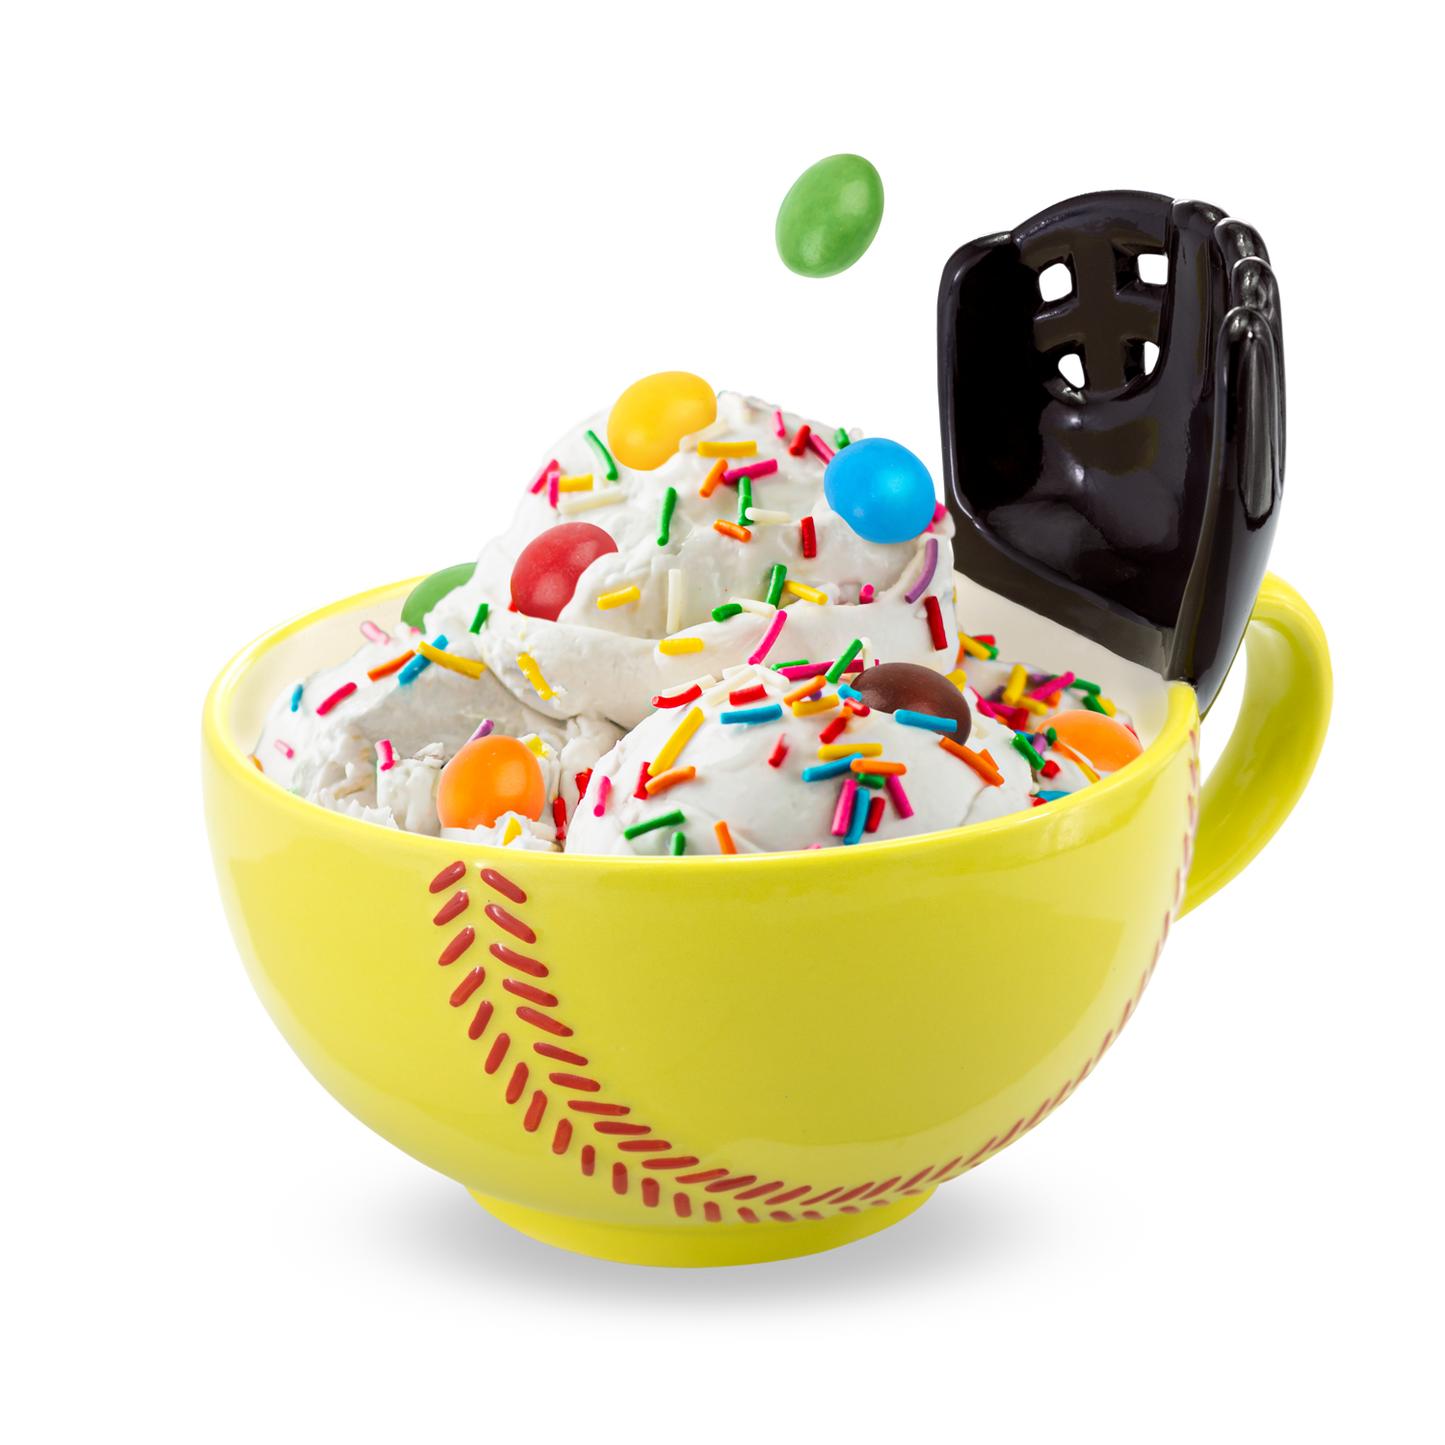 The Softball Mug with a Glove! START YOUR MORNINGS WITH FUN! Play with your food with this original yellow softball mug with an attached glove. Perfect for scoring mini marshmallows into cocoa, cereal into milk, crackers into soup, or toppings onto ice cream! Something to root for in your morning routine!   